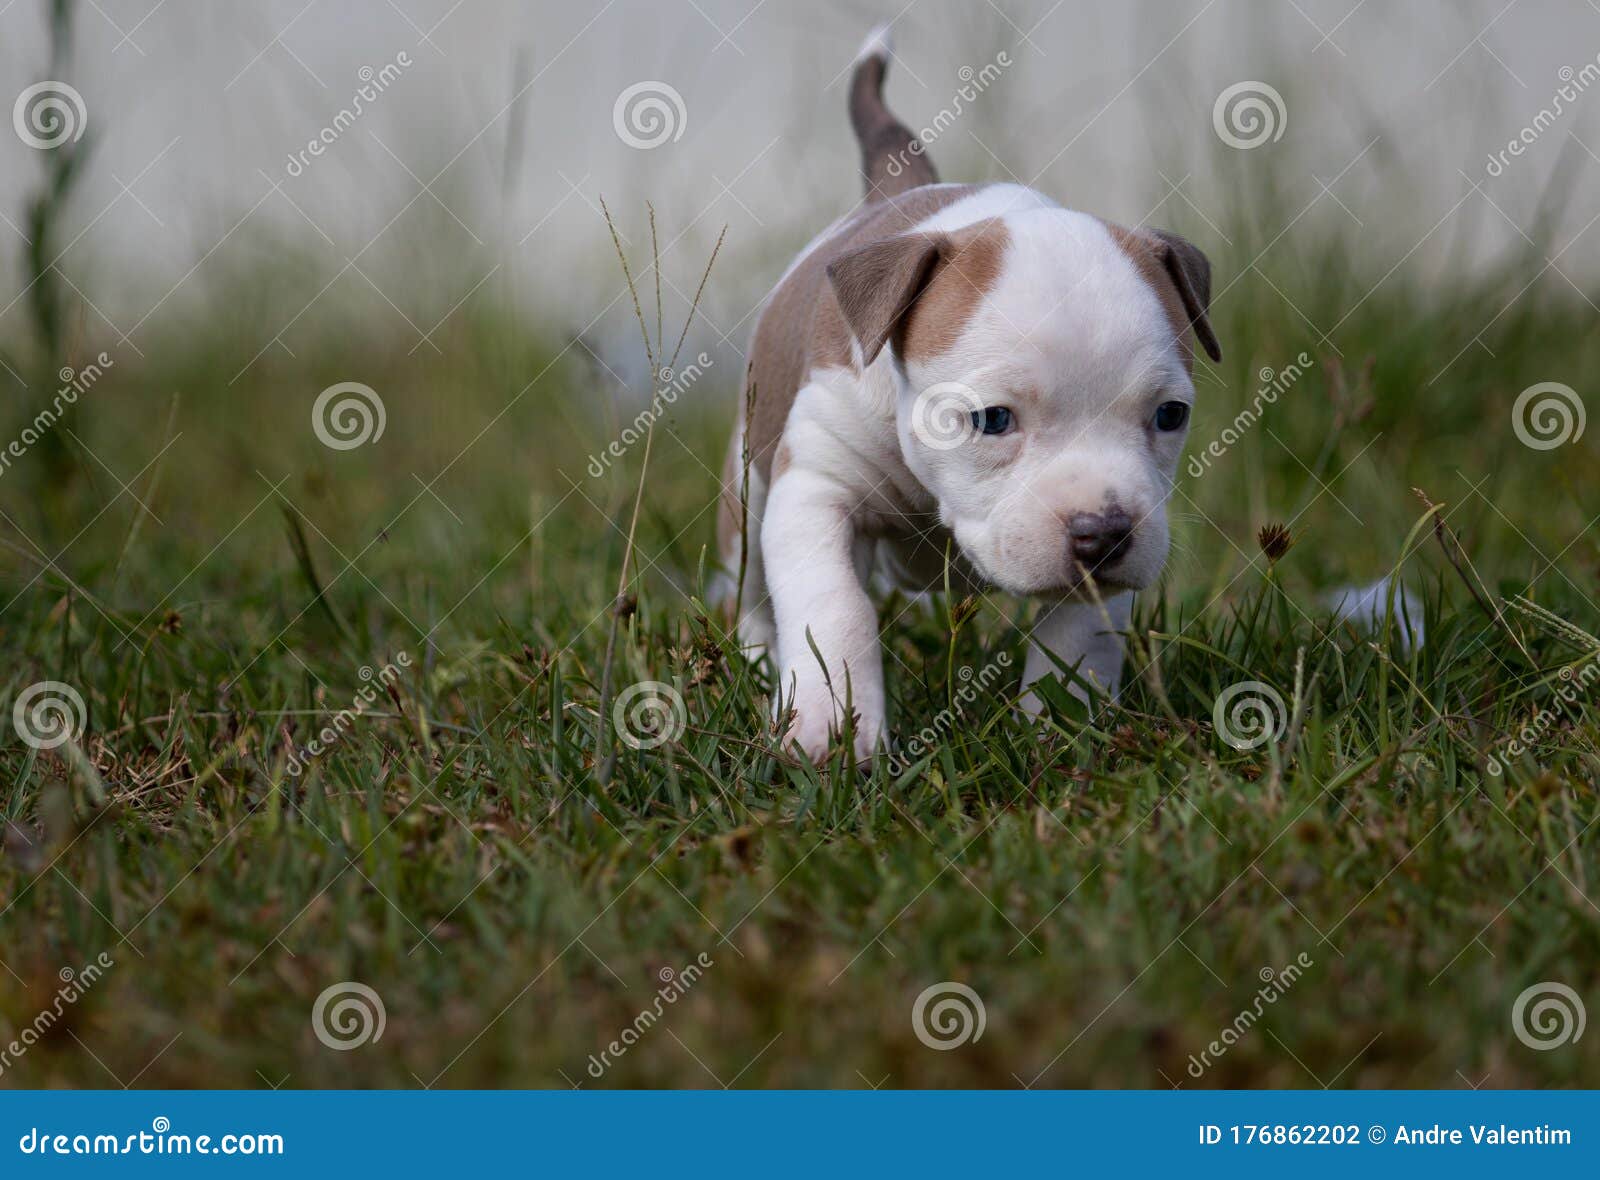 Puppy playing in the grass stock photo. Image of domestic - 176862202